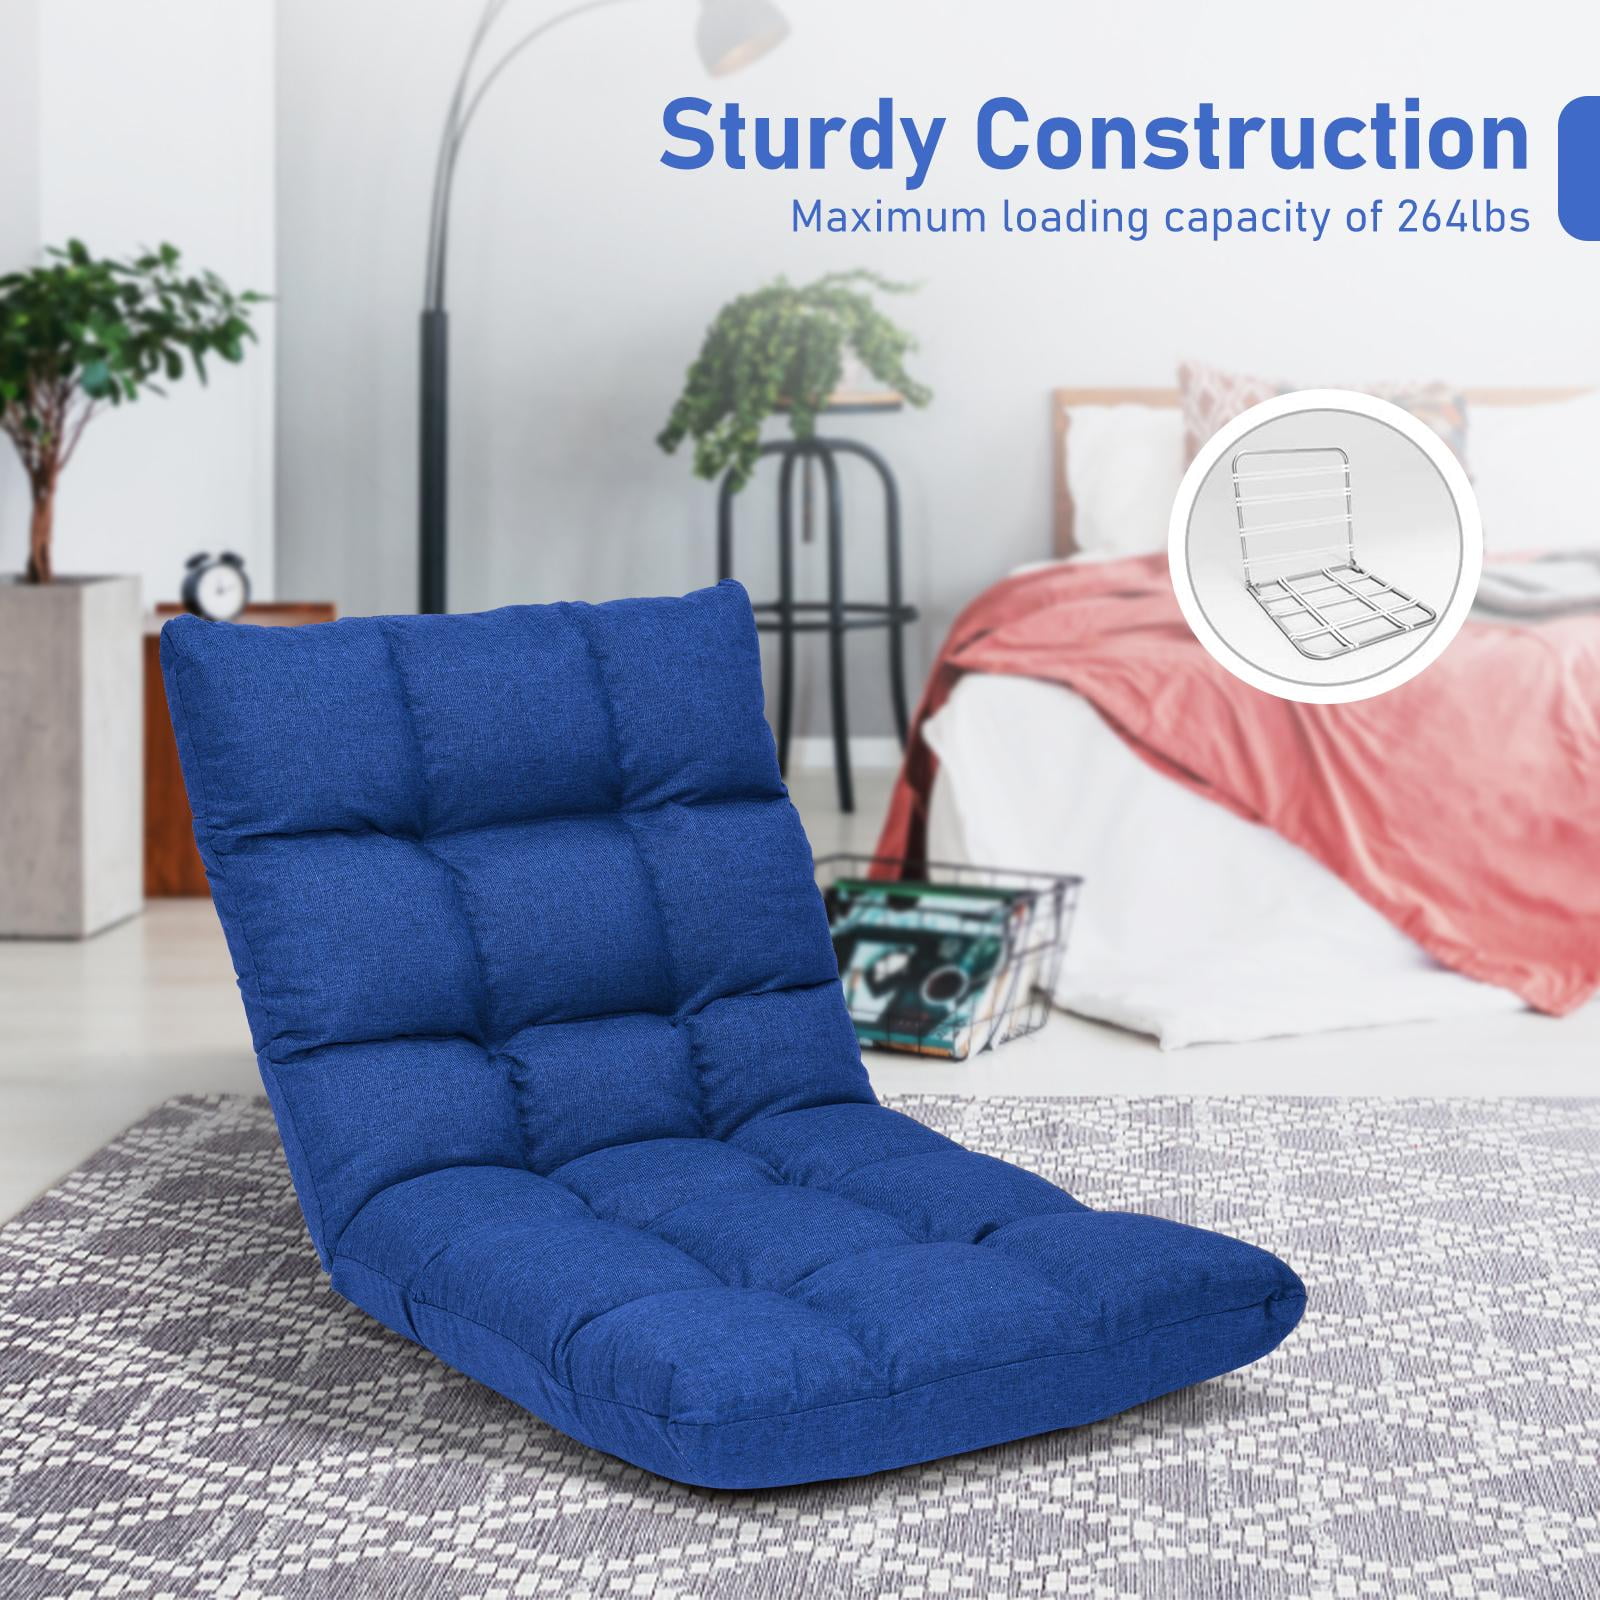 Giantex Adjustable Floor Gaming Sofa Chair 14-Position Cushioned Folding  Lazy Recliner High Resilience Sponge, Breathable Cotton & Linen Fabric